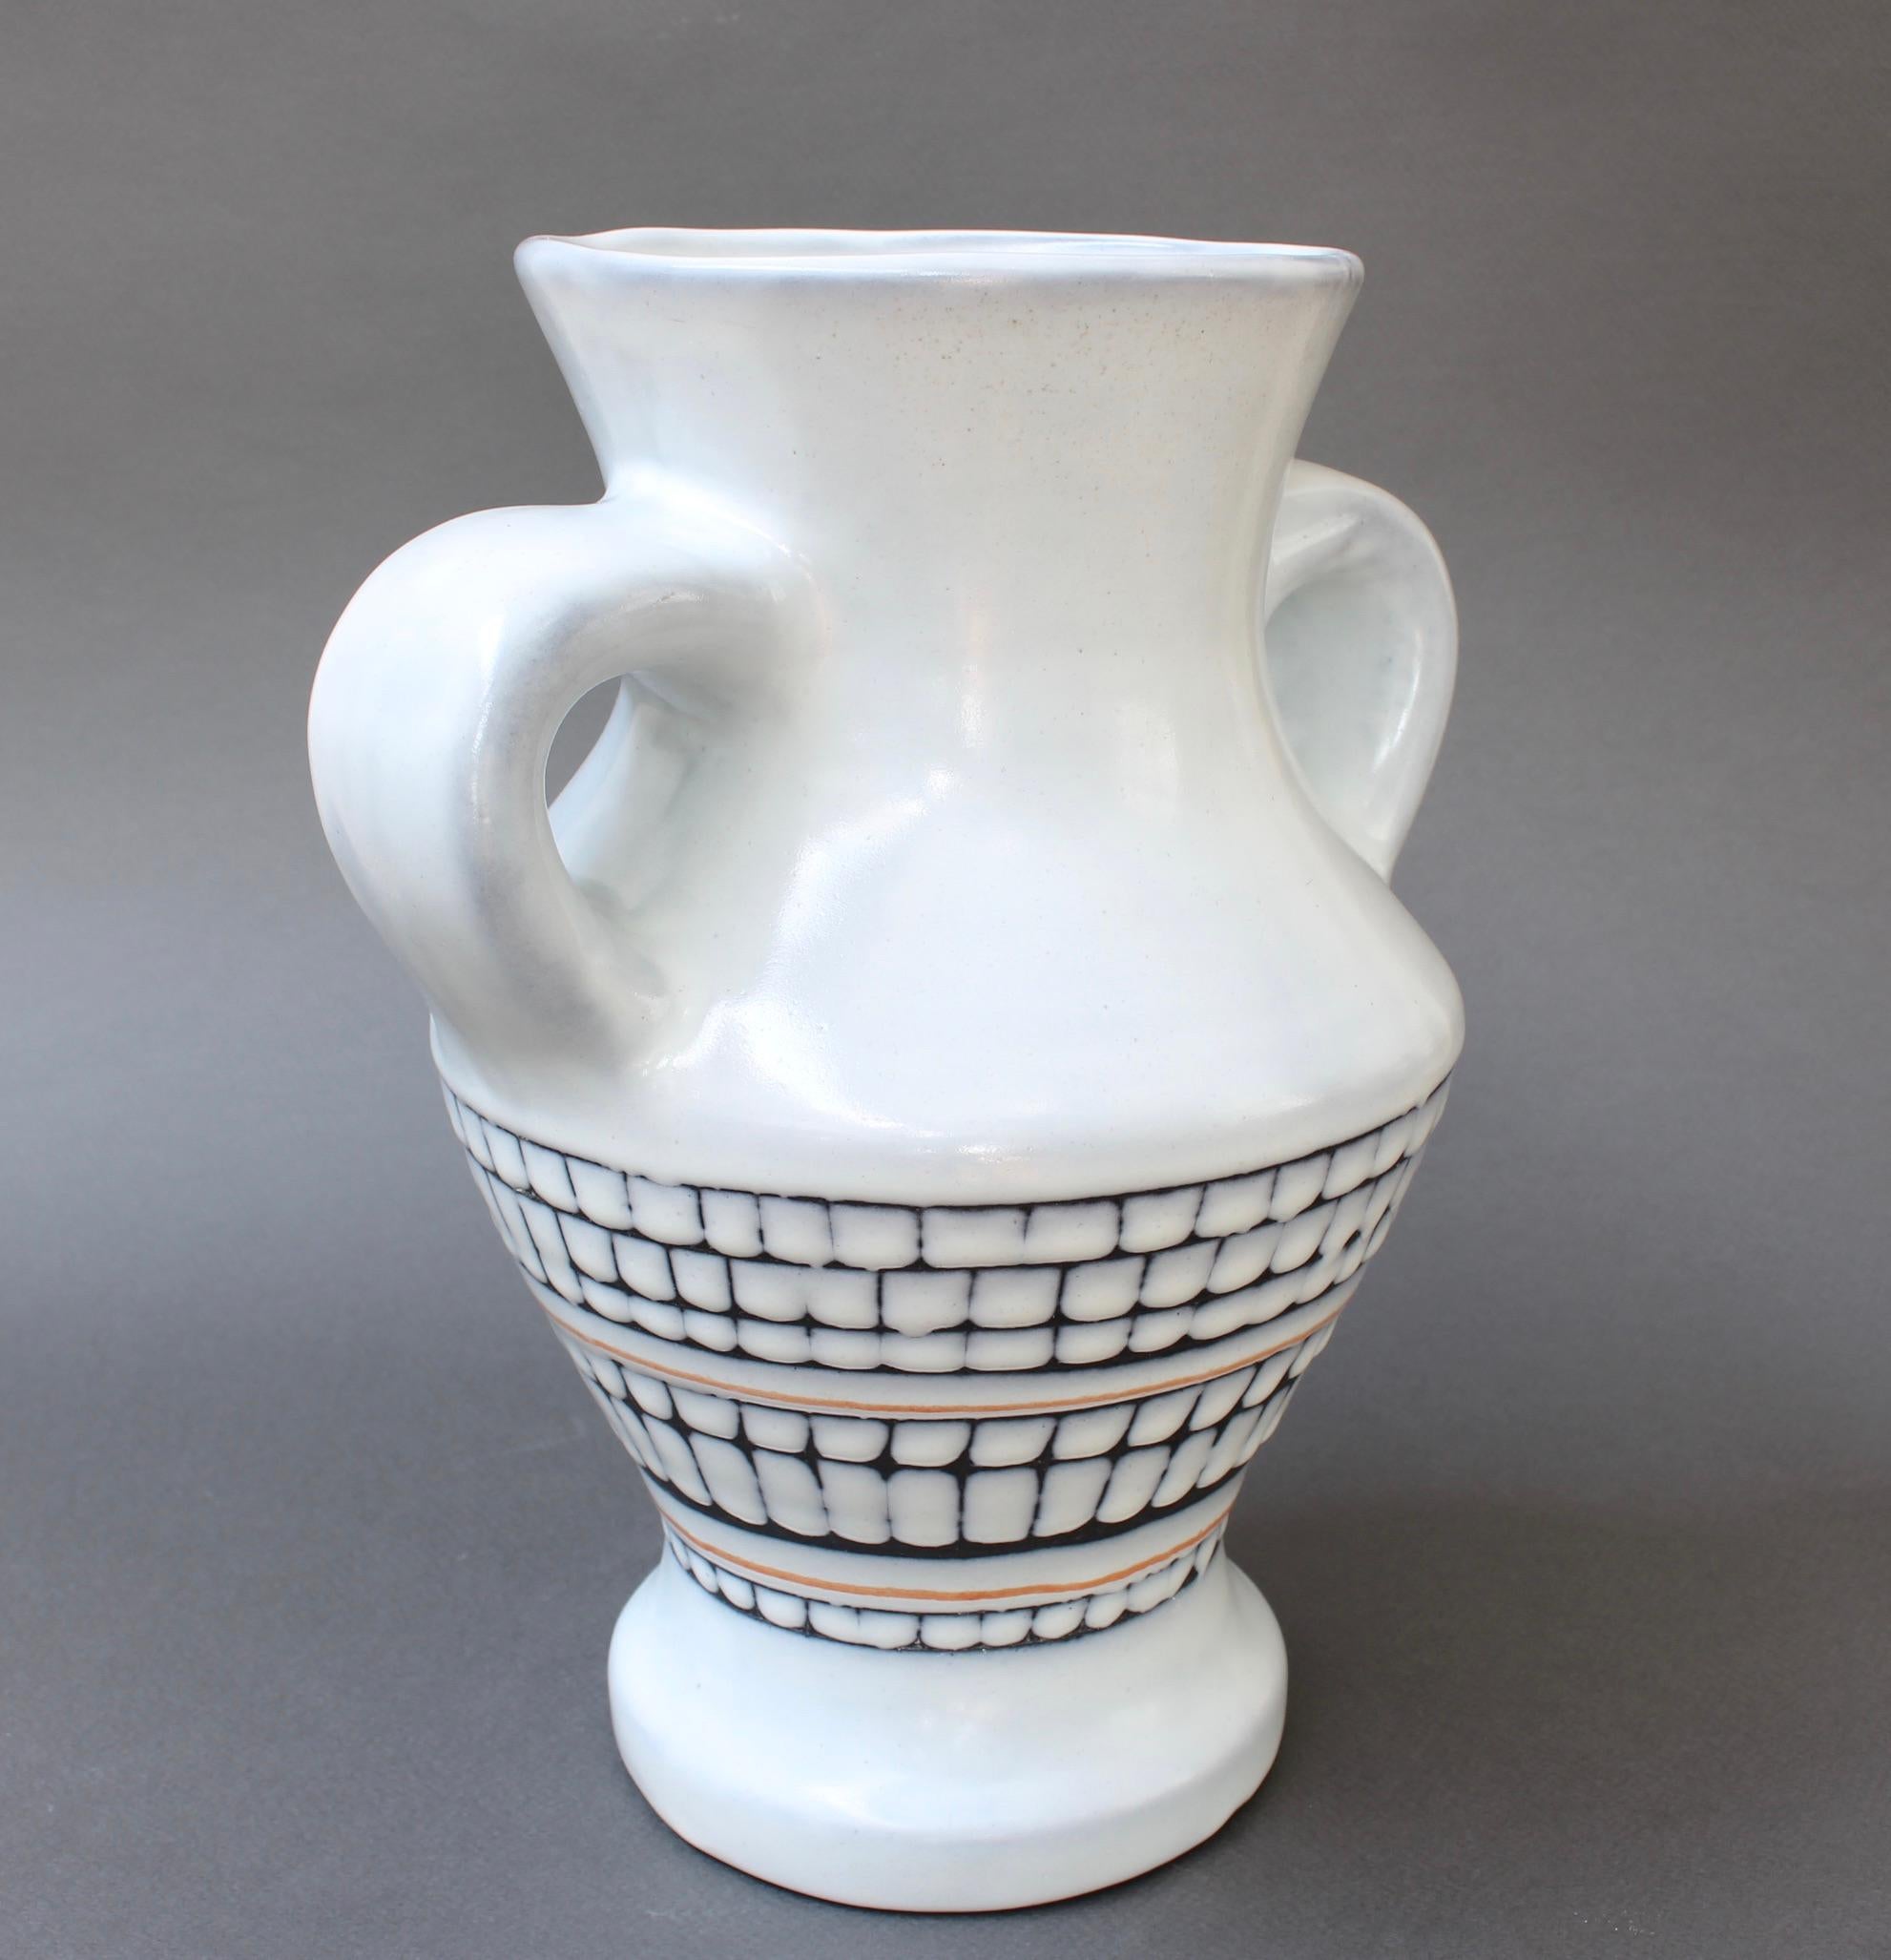 Vintage French Ceramic Vase with Handles by Roger Capron, 'circa 1950s' For Sale 4